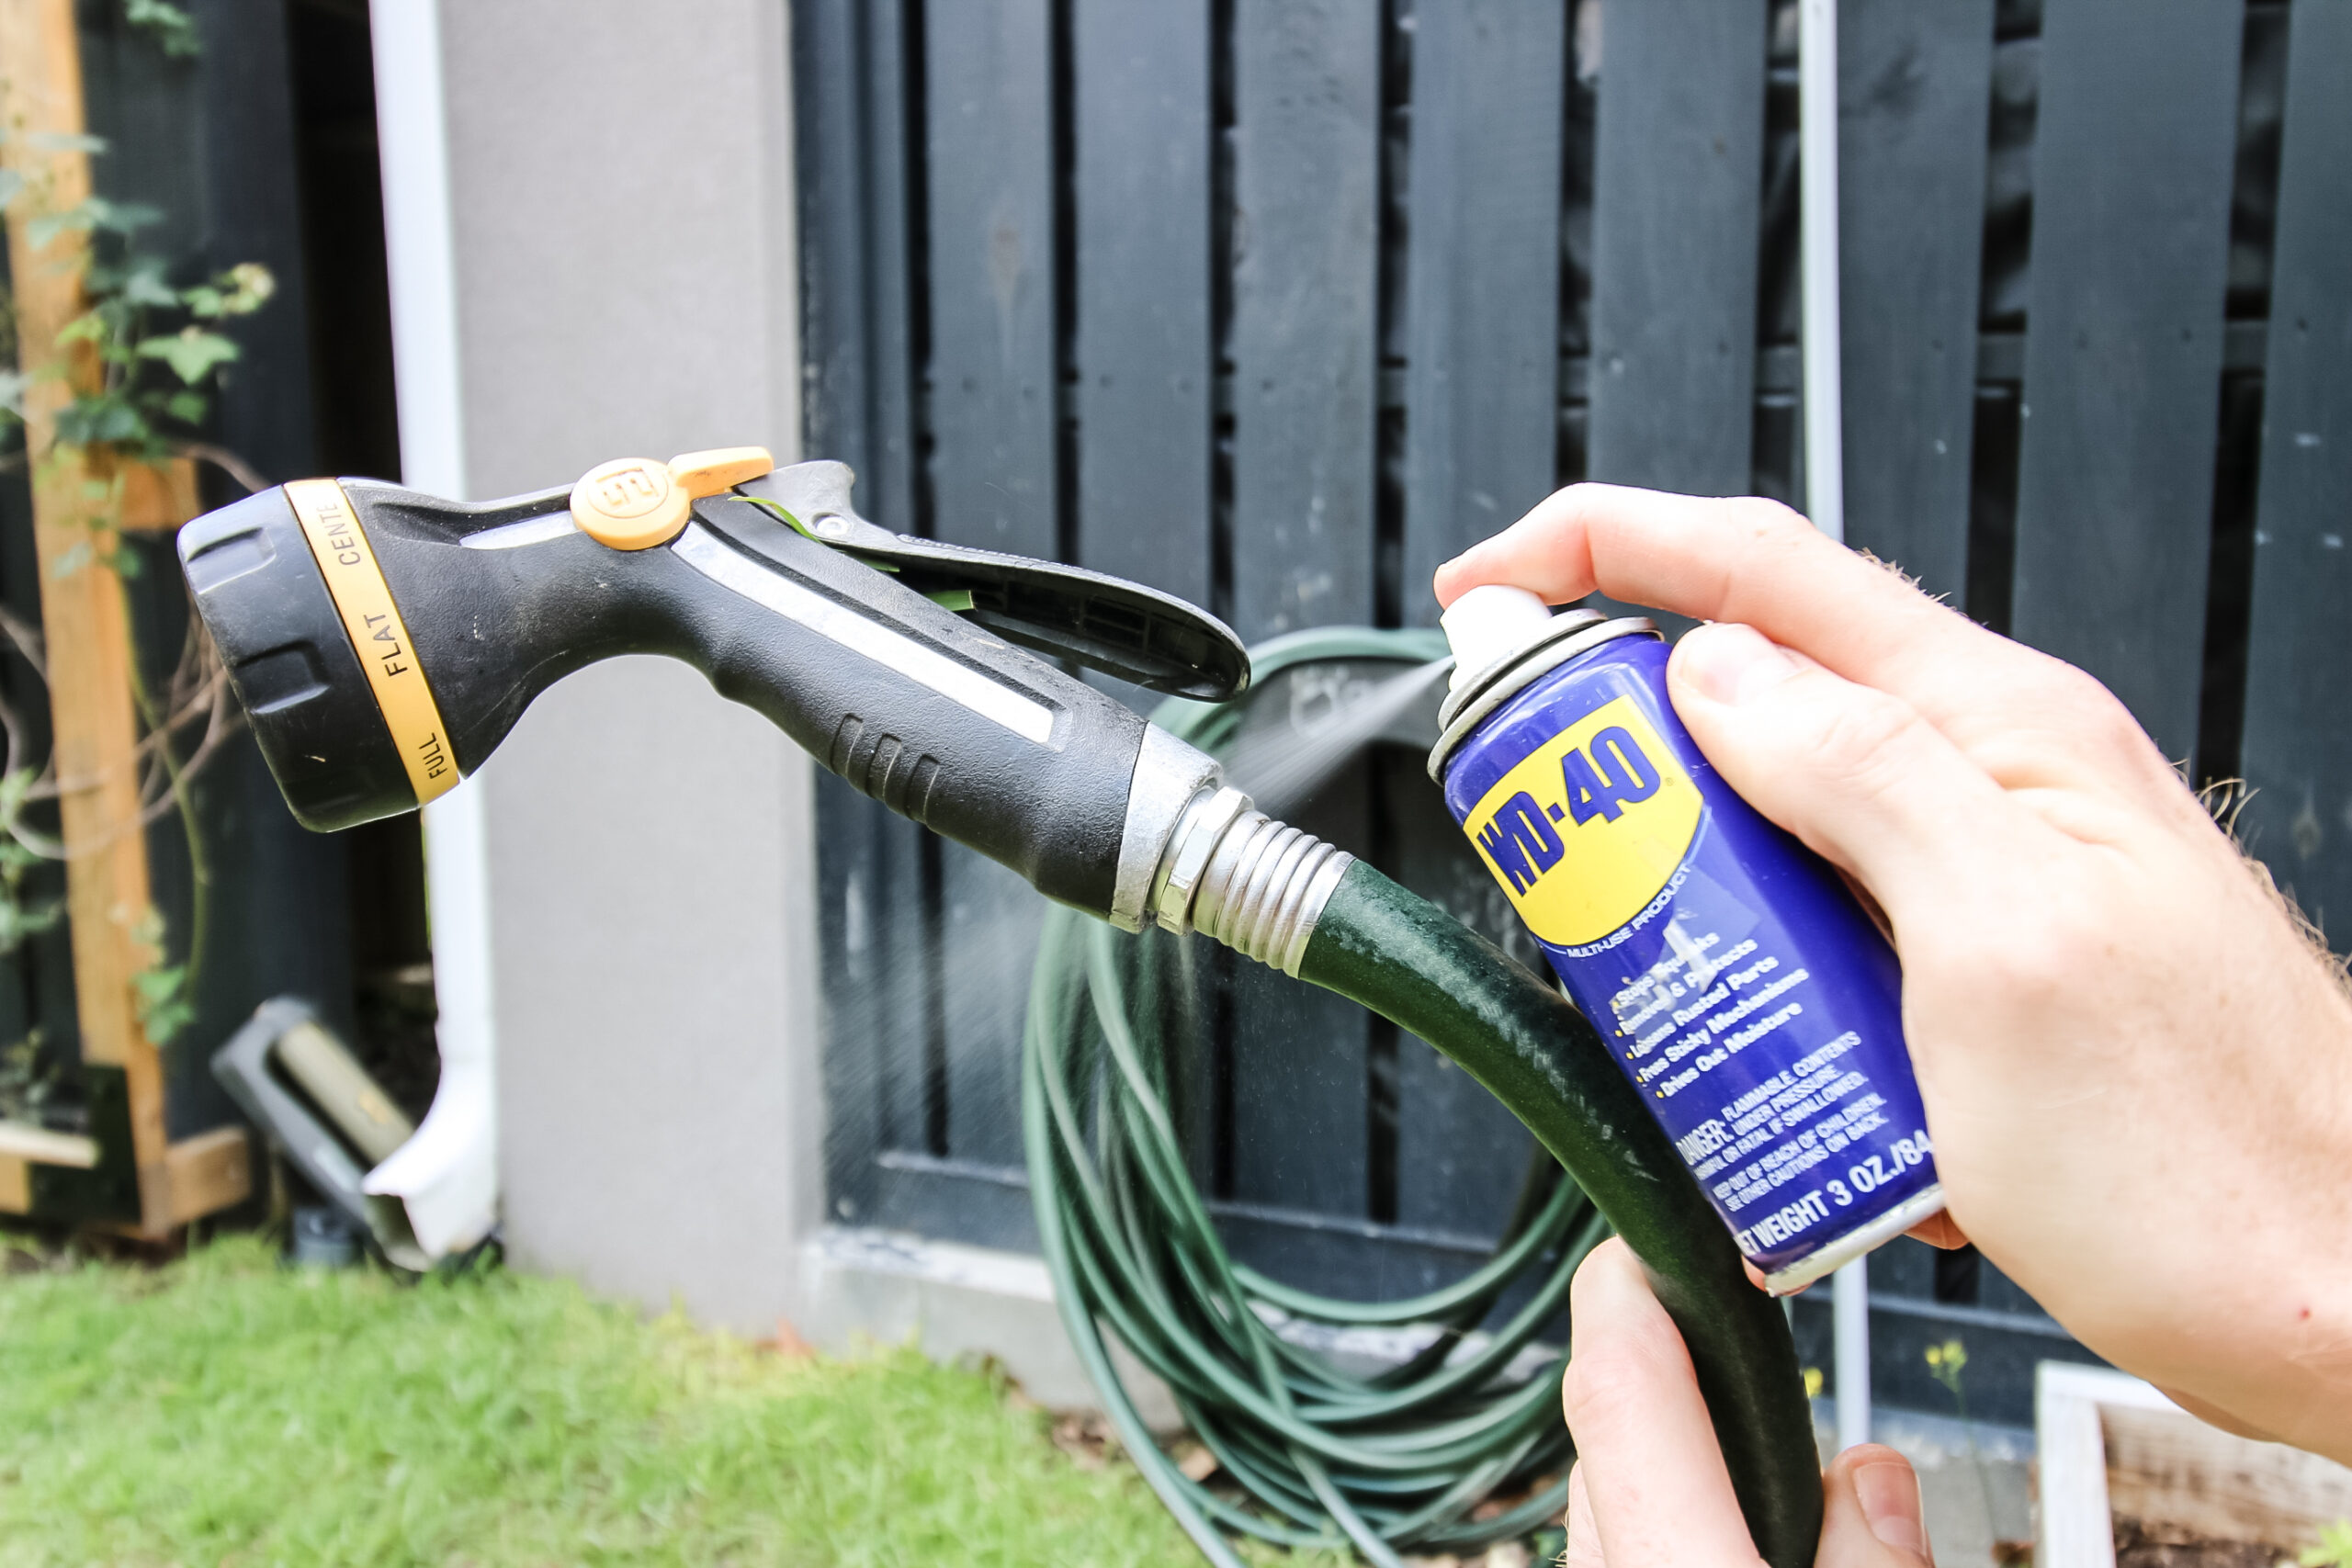 How to remove a stuck hose from an outdoor spigot